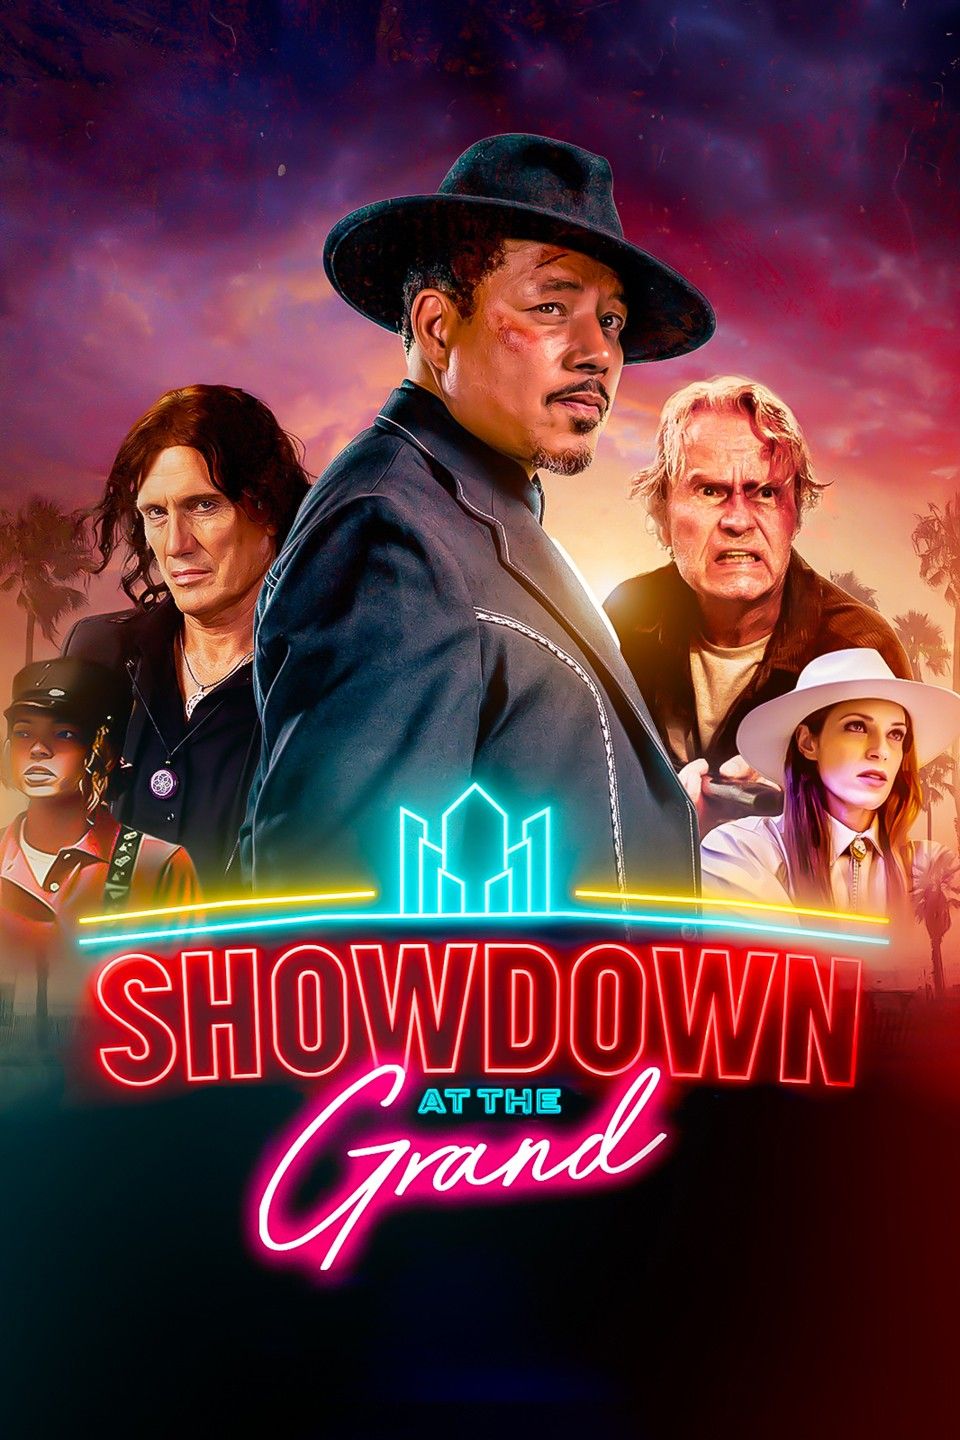 Terrence Howard Joins Forces with Dolph Lundgren in Showdown at the Grand